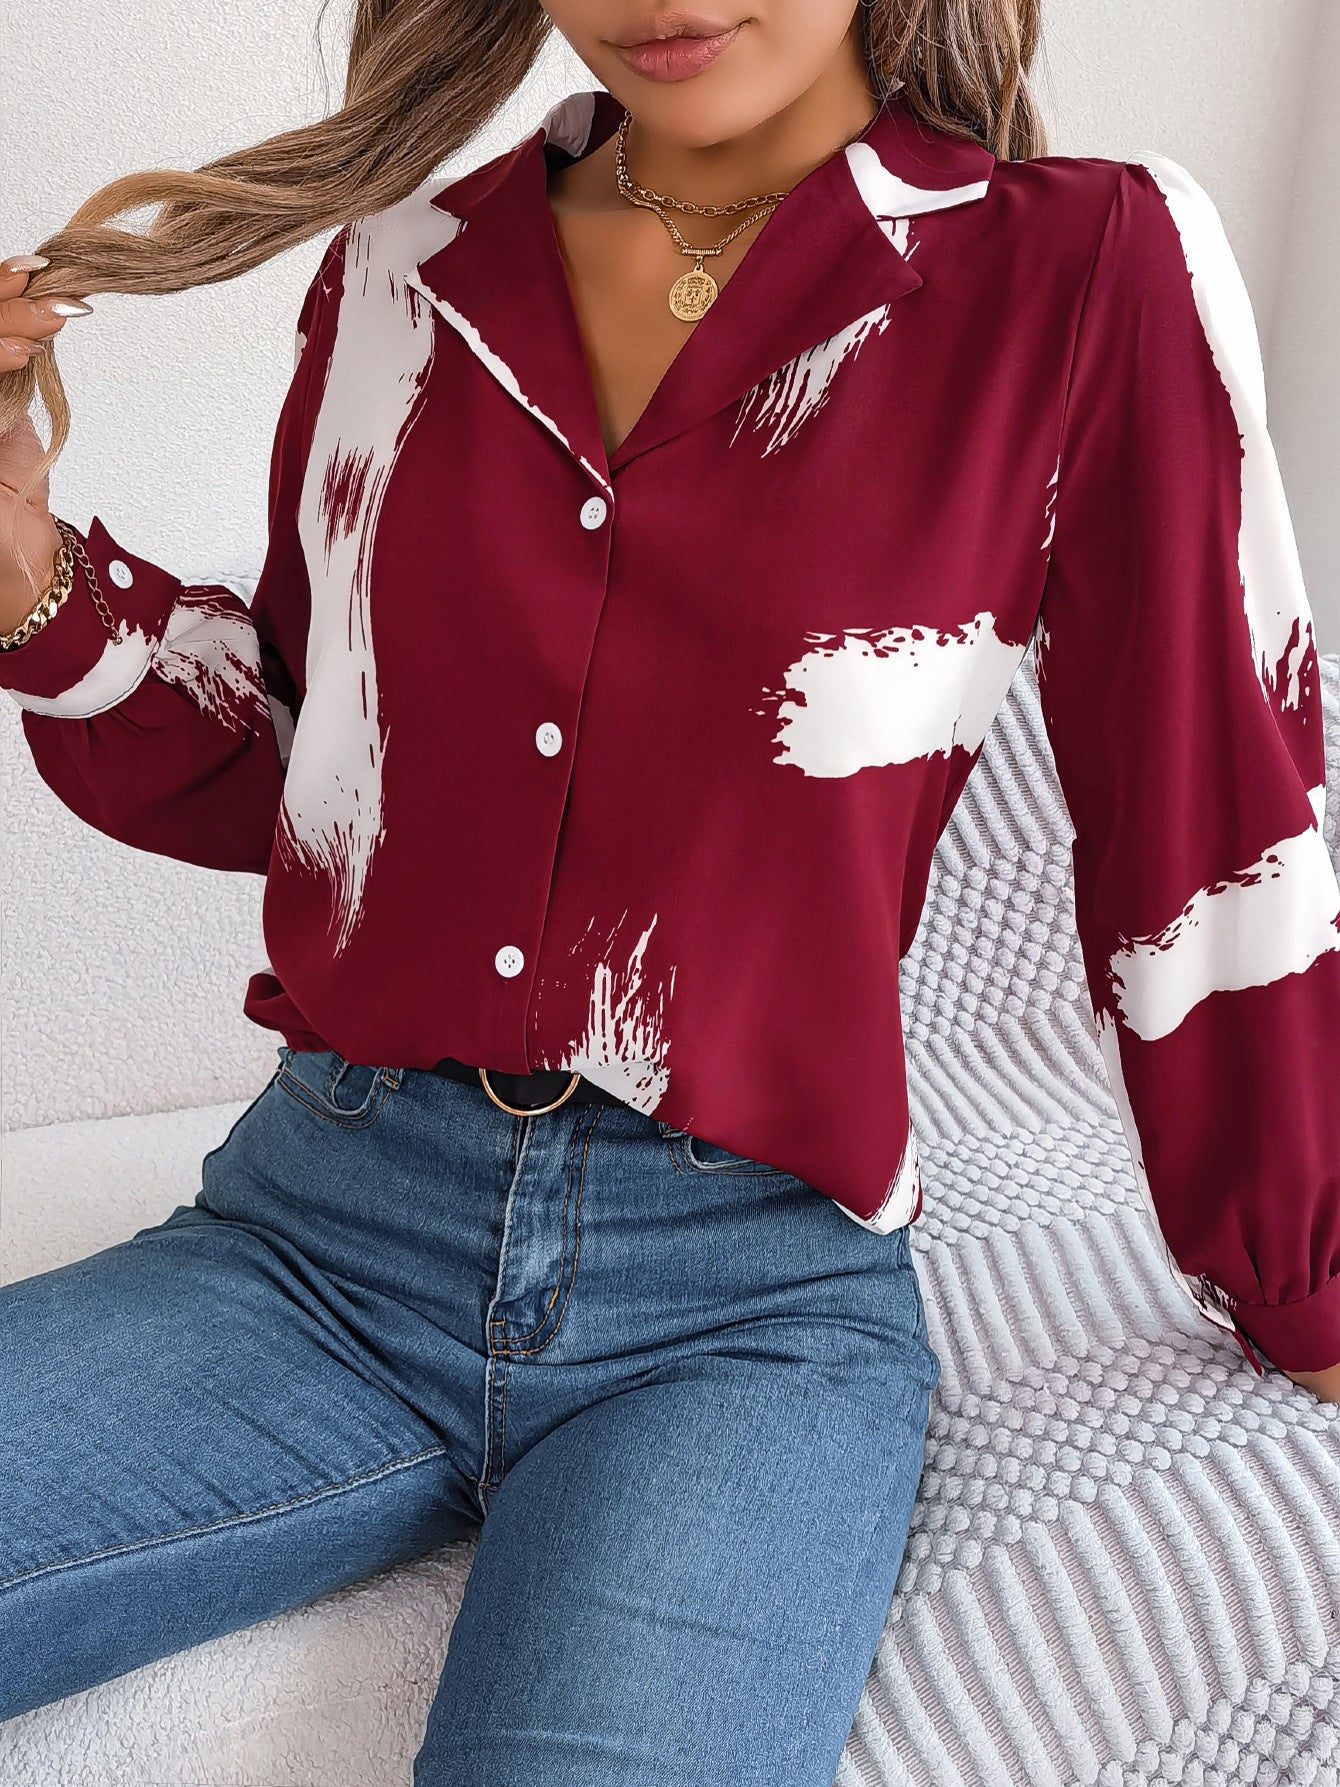 Autumn Winter Contrast Color Striped Collar Long Sleeve Shirt Women Clothing